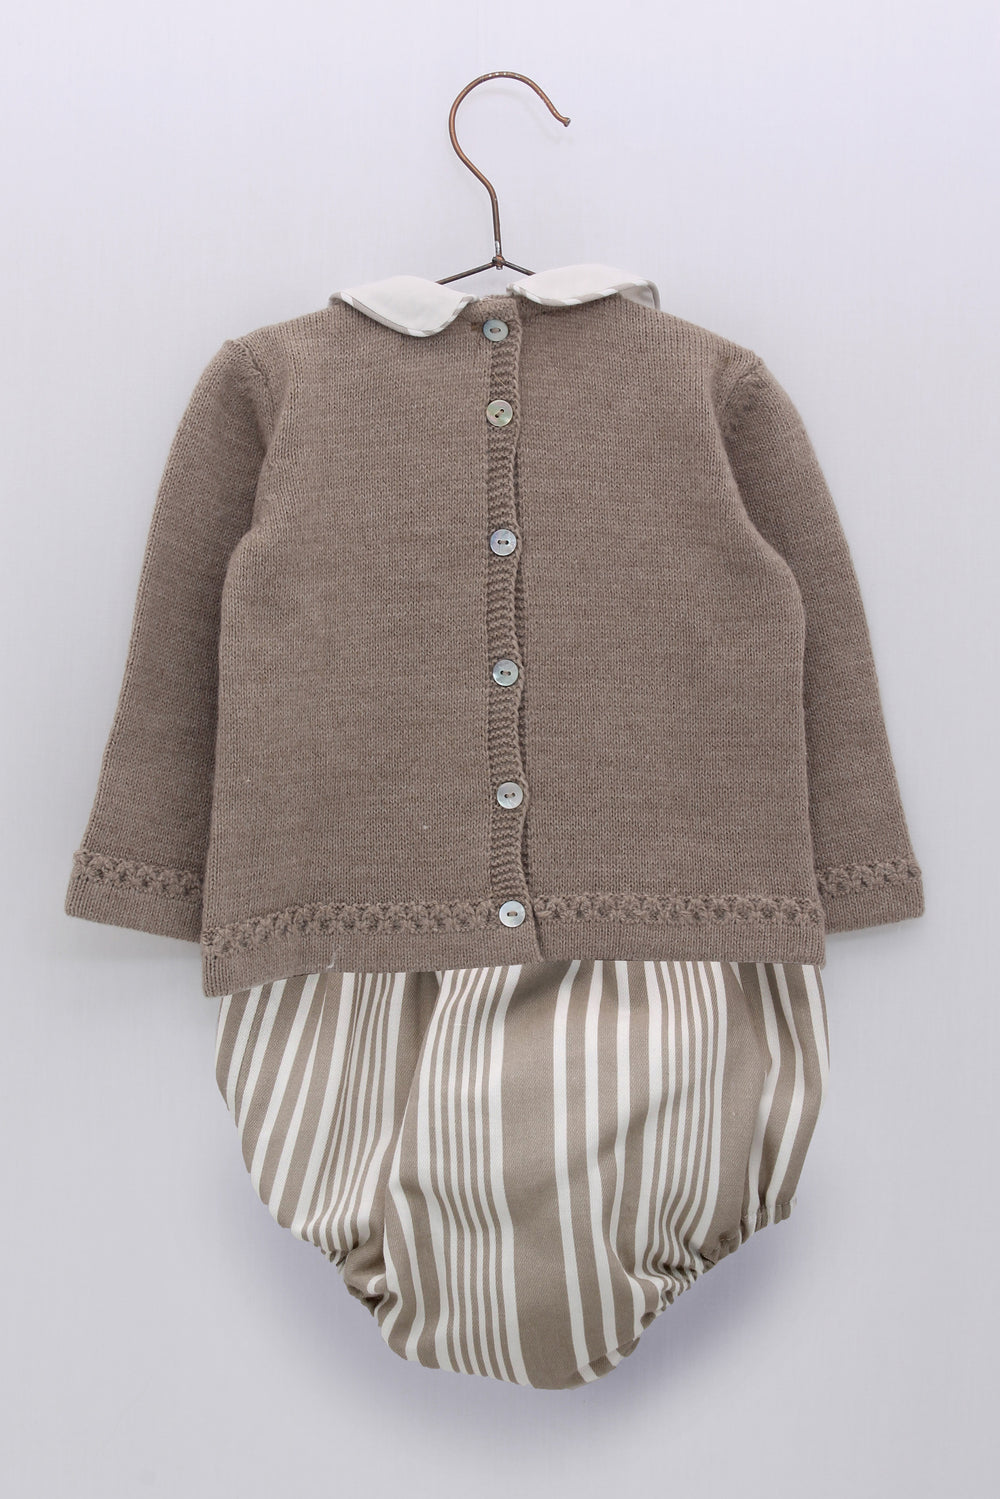 Foque PREORDER "Donald" Taupe Knit Bunny Top & Jam Pants | Millie and John